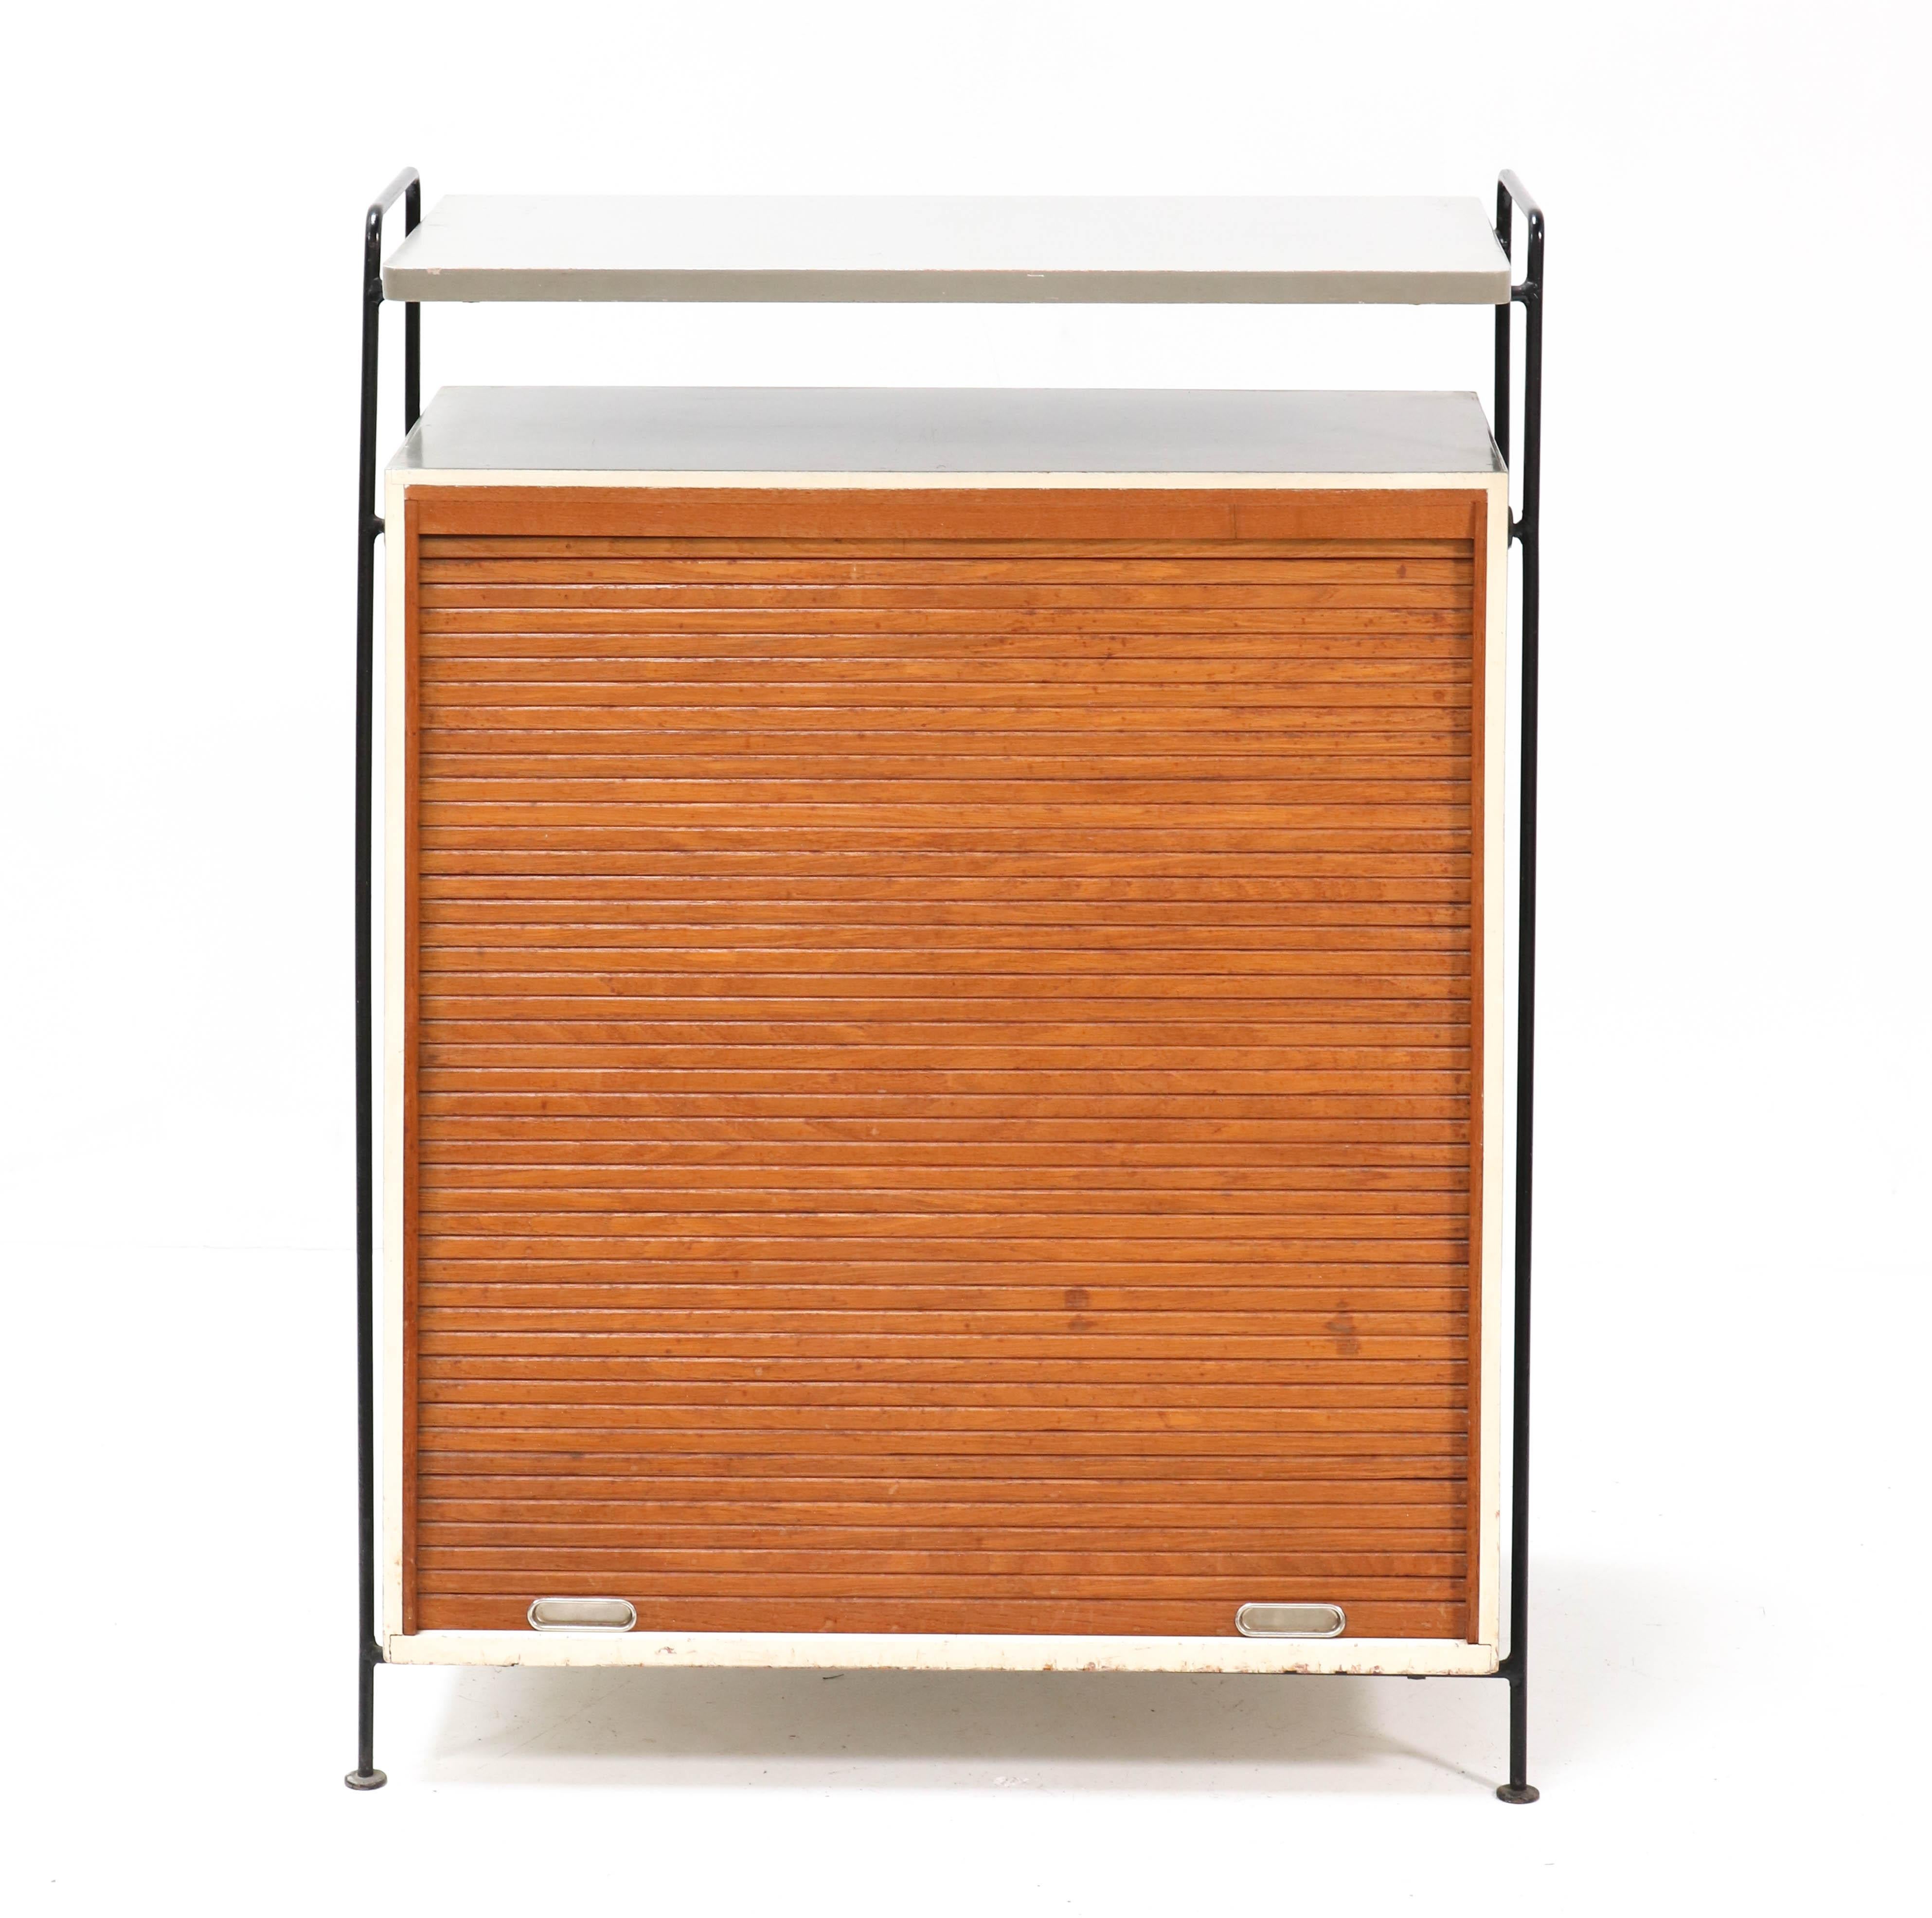 Mid-20th Century Mid-Century Modern Cabinet Attributed to 't Spectrum Bergeijk, 1960s For Sale